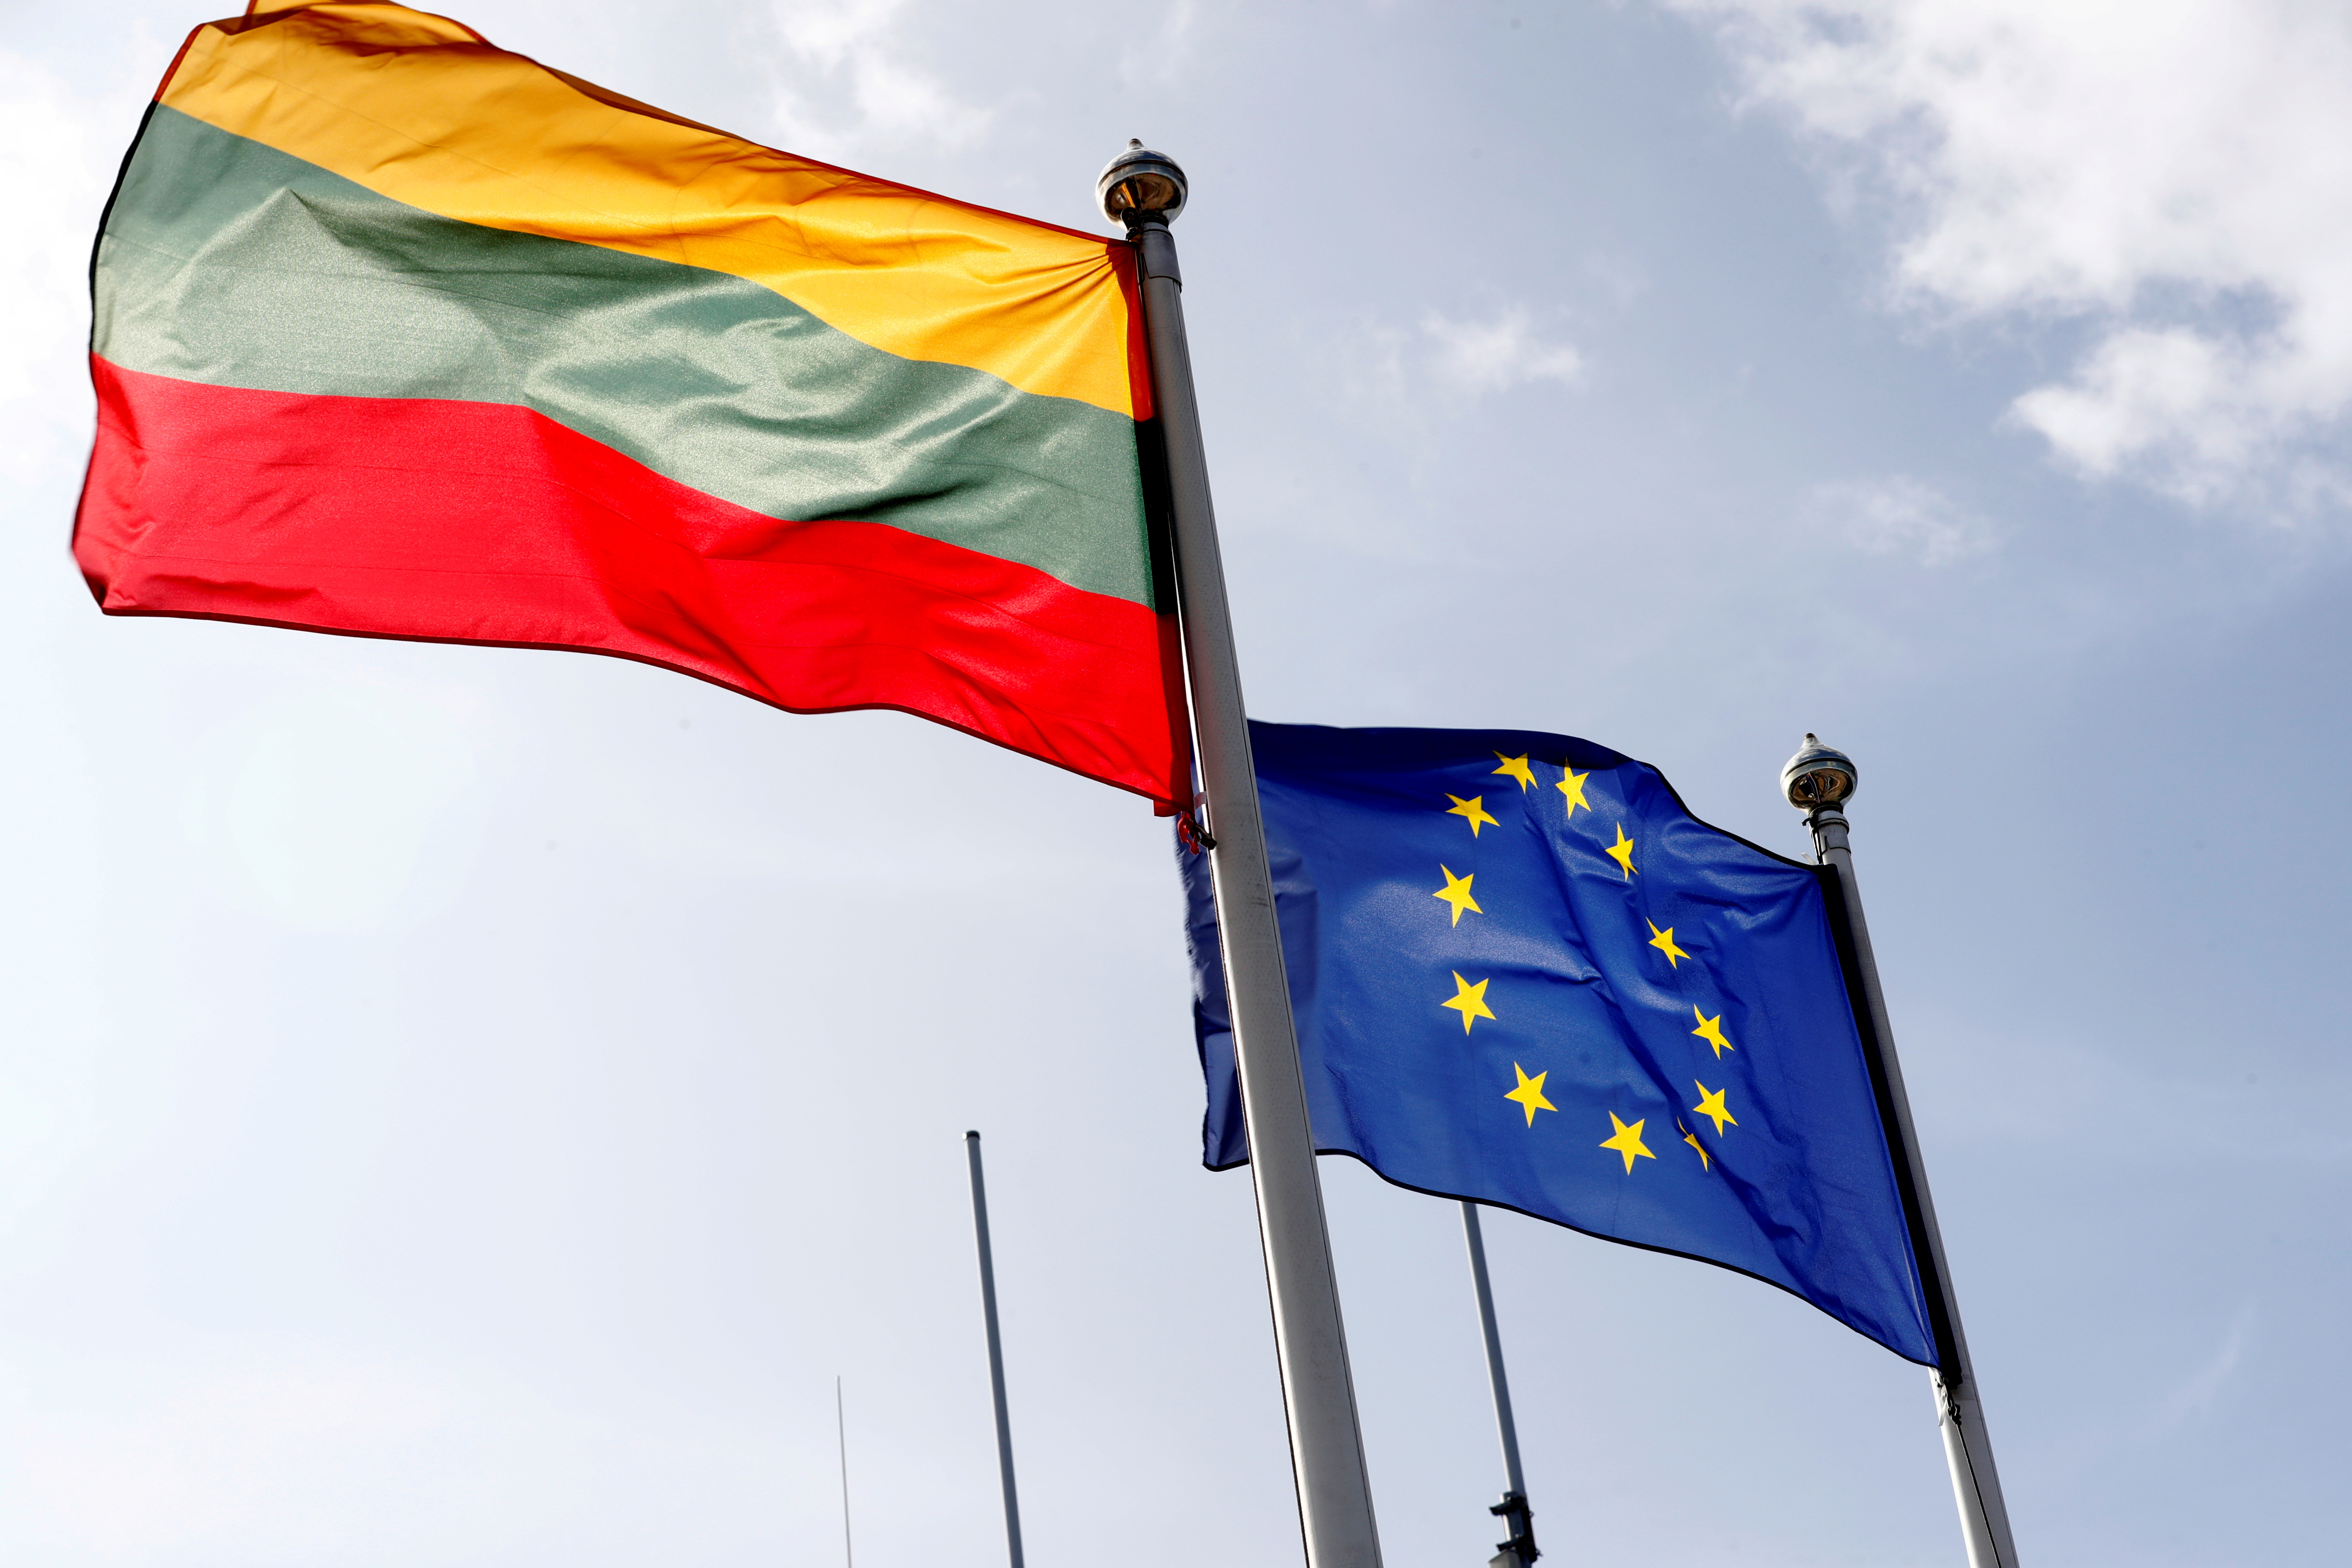 European Union and Lithuanian flags flutter at border crossing point in Medininkai, Lithuania September 18, 2020. REUTERS/Ints Kalnins